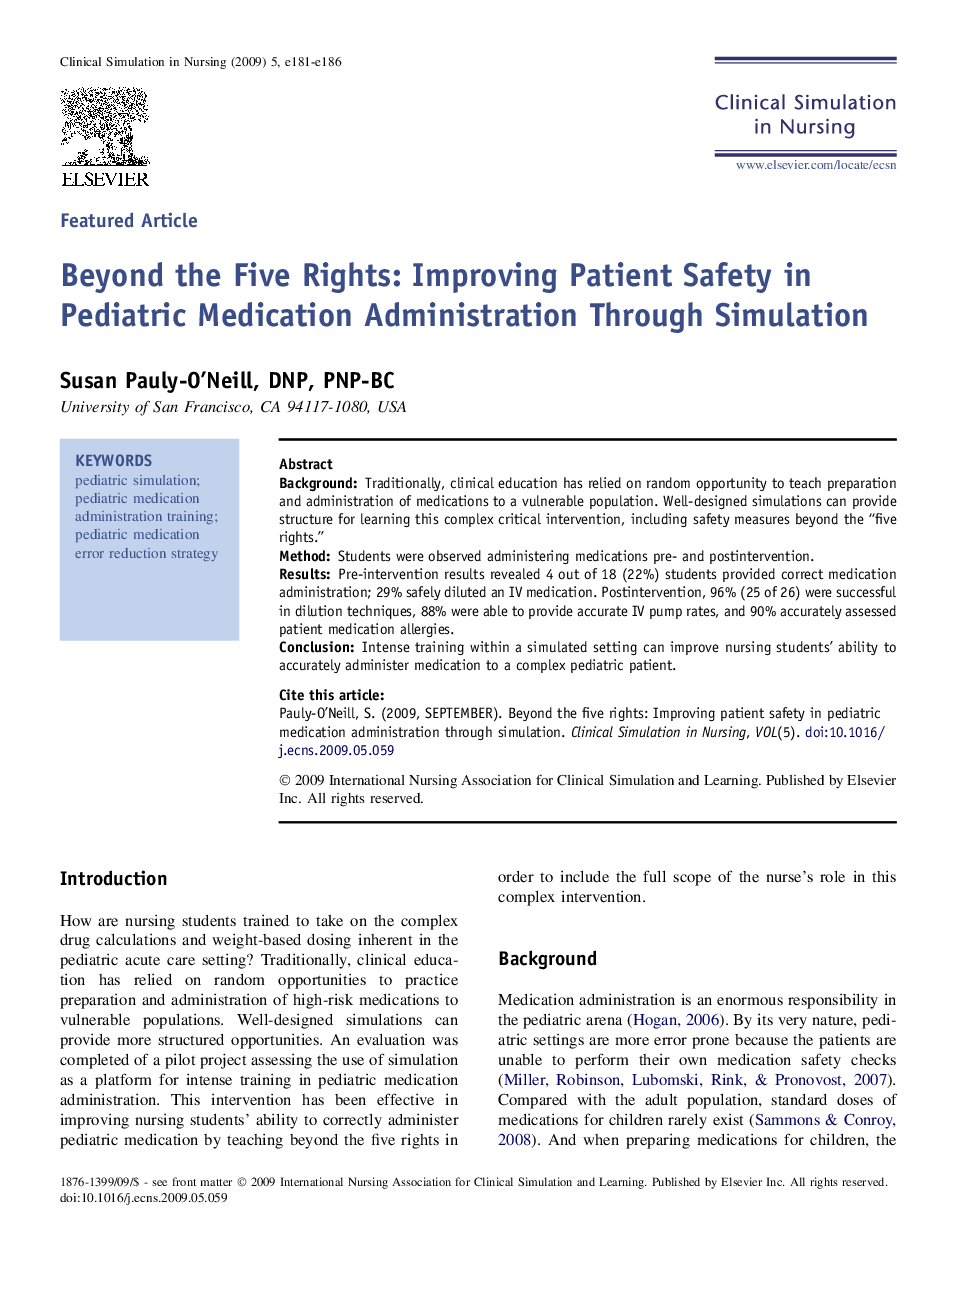 Beyond the Five Rights: Improving Patient Safety in Pediatric Medication Administration Through Simulation 